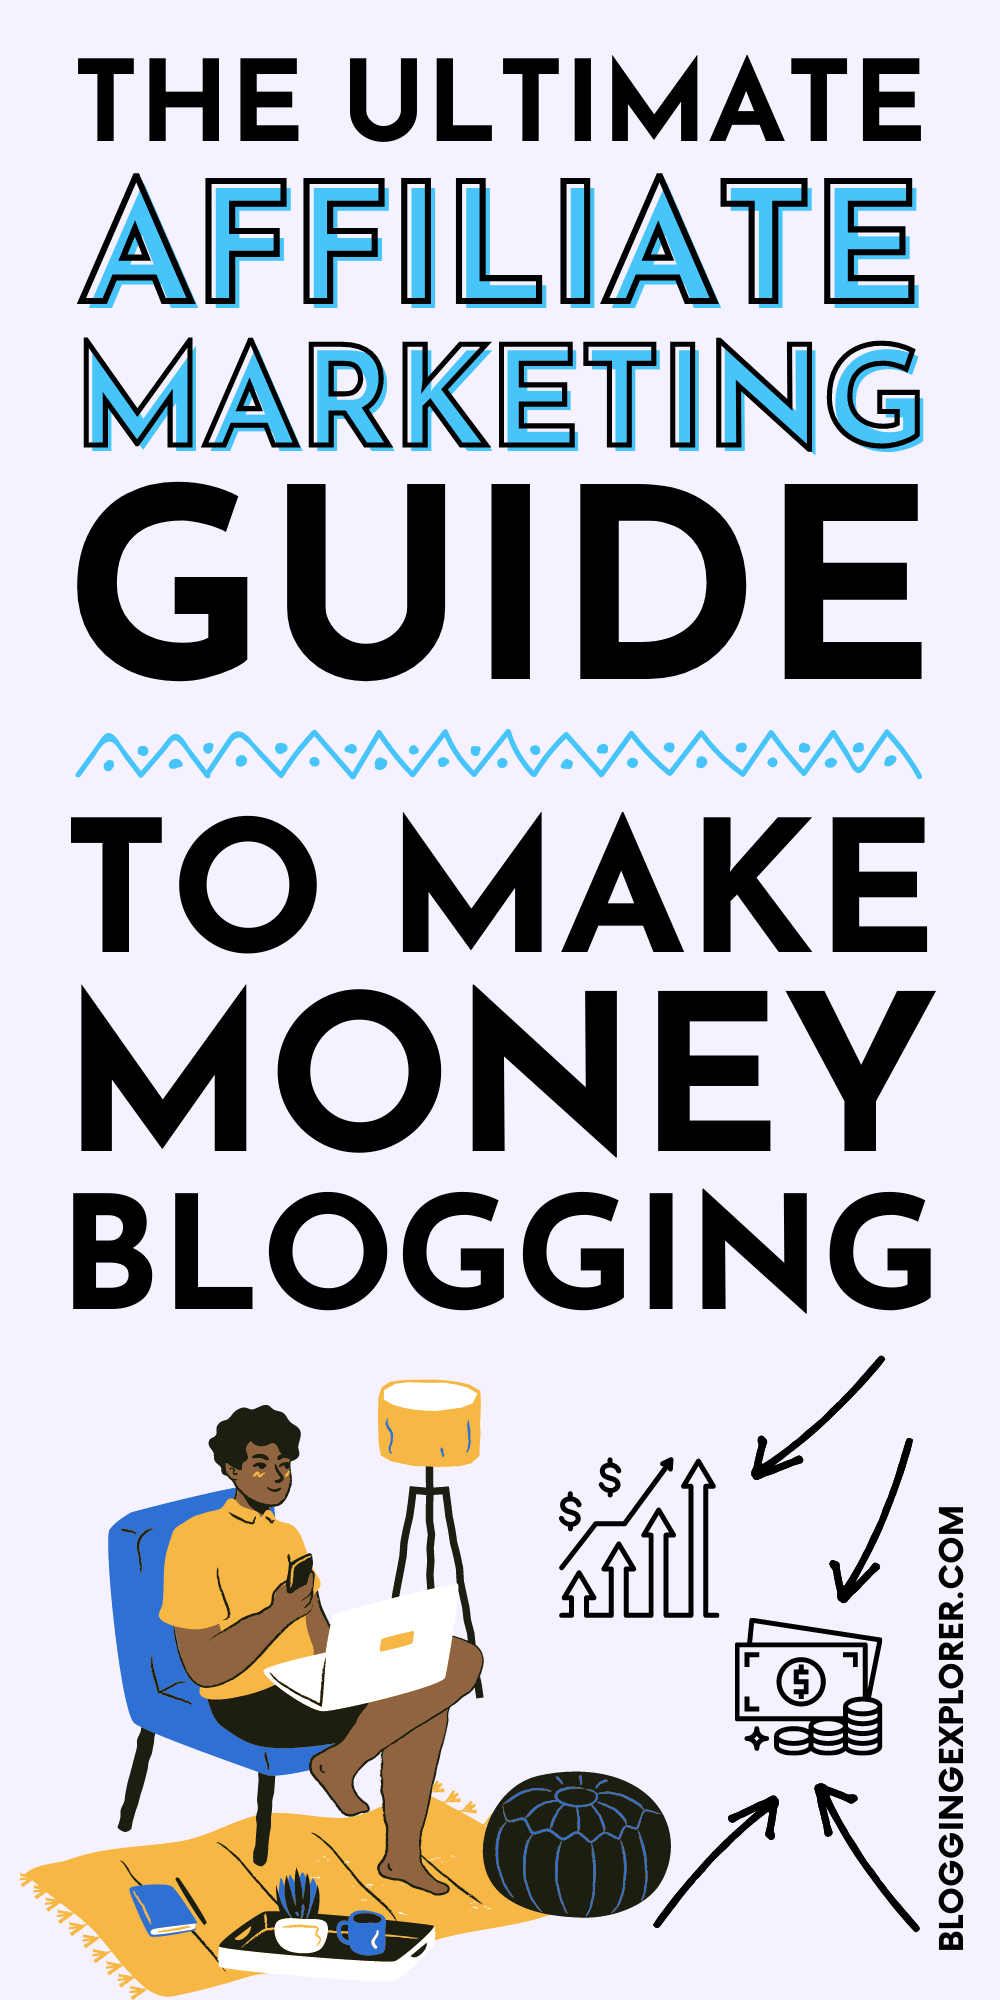 The ultimate affiliate marketing guide to make money blogging